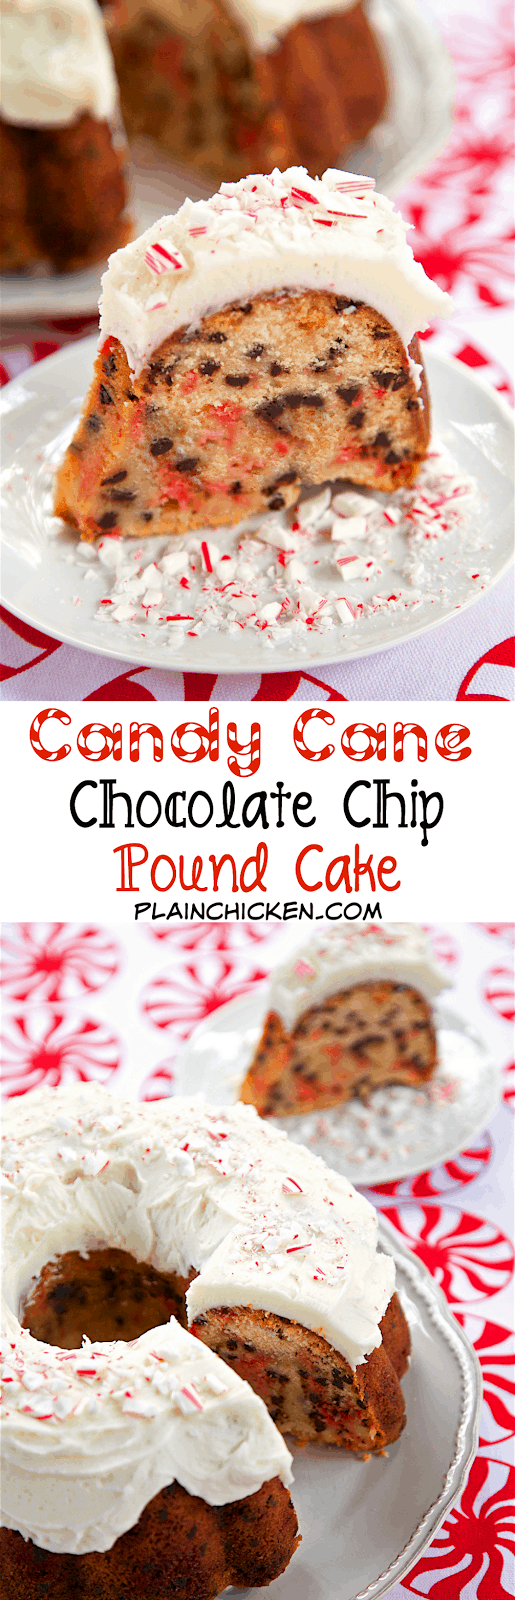 Candy Cane Chocolate Chip Pound Cake - homemade pound cake loaded with crushed candy canes and chocolate chips and topped with a quick homemade peppermint buttercream - AMAZING! Definitely going on our holiday table!